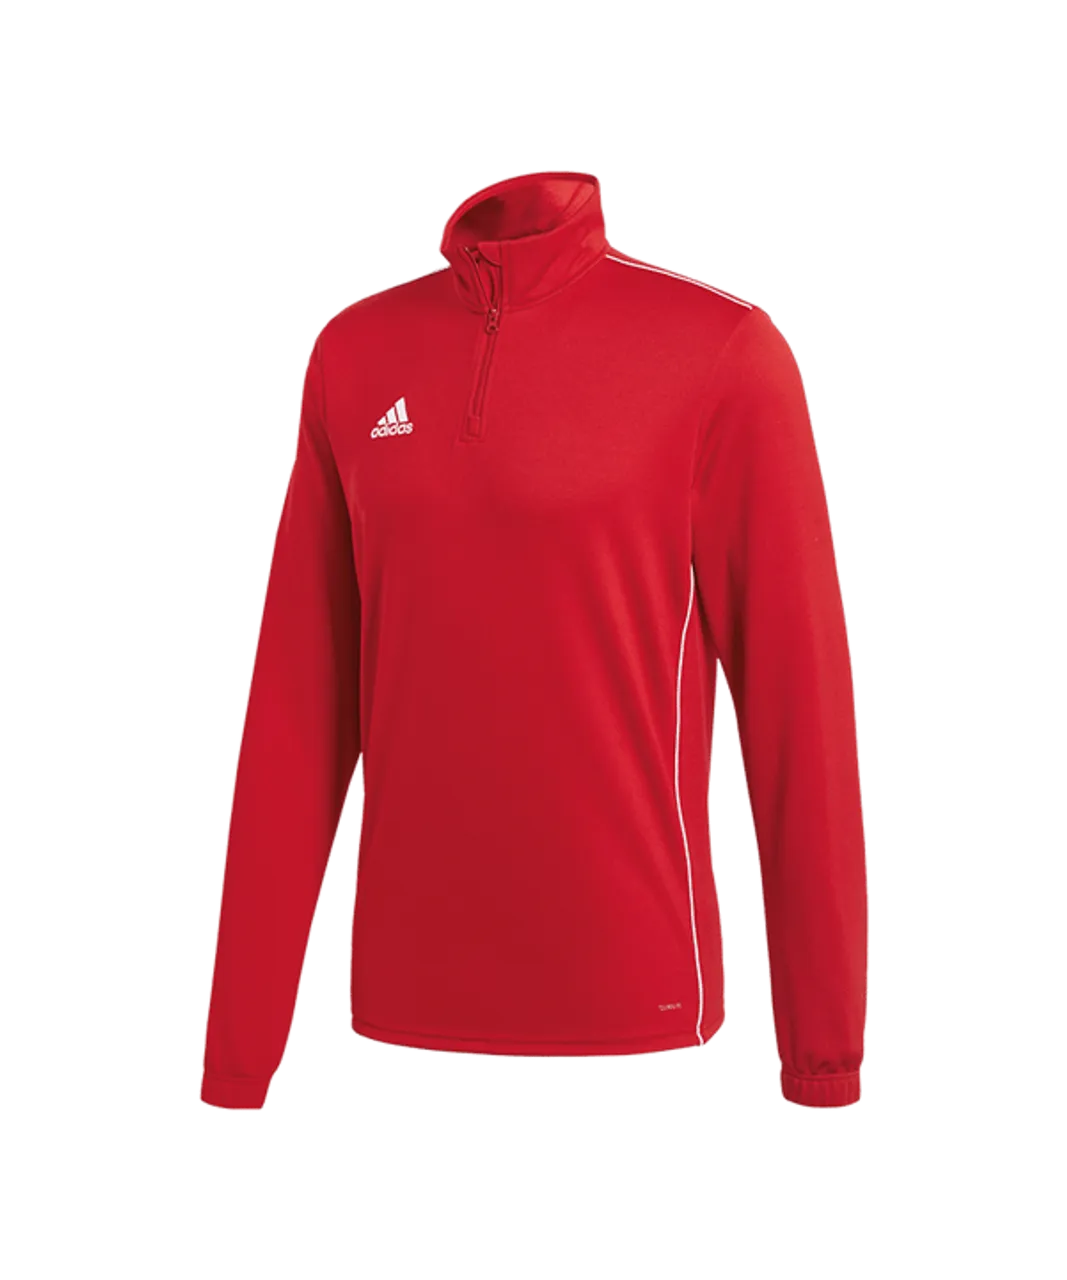 adidas Core 18 Training Top Rot Weiss